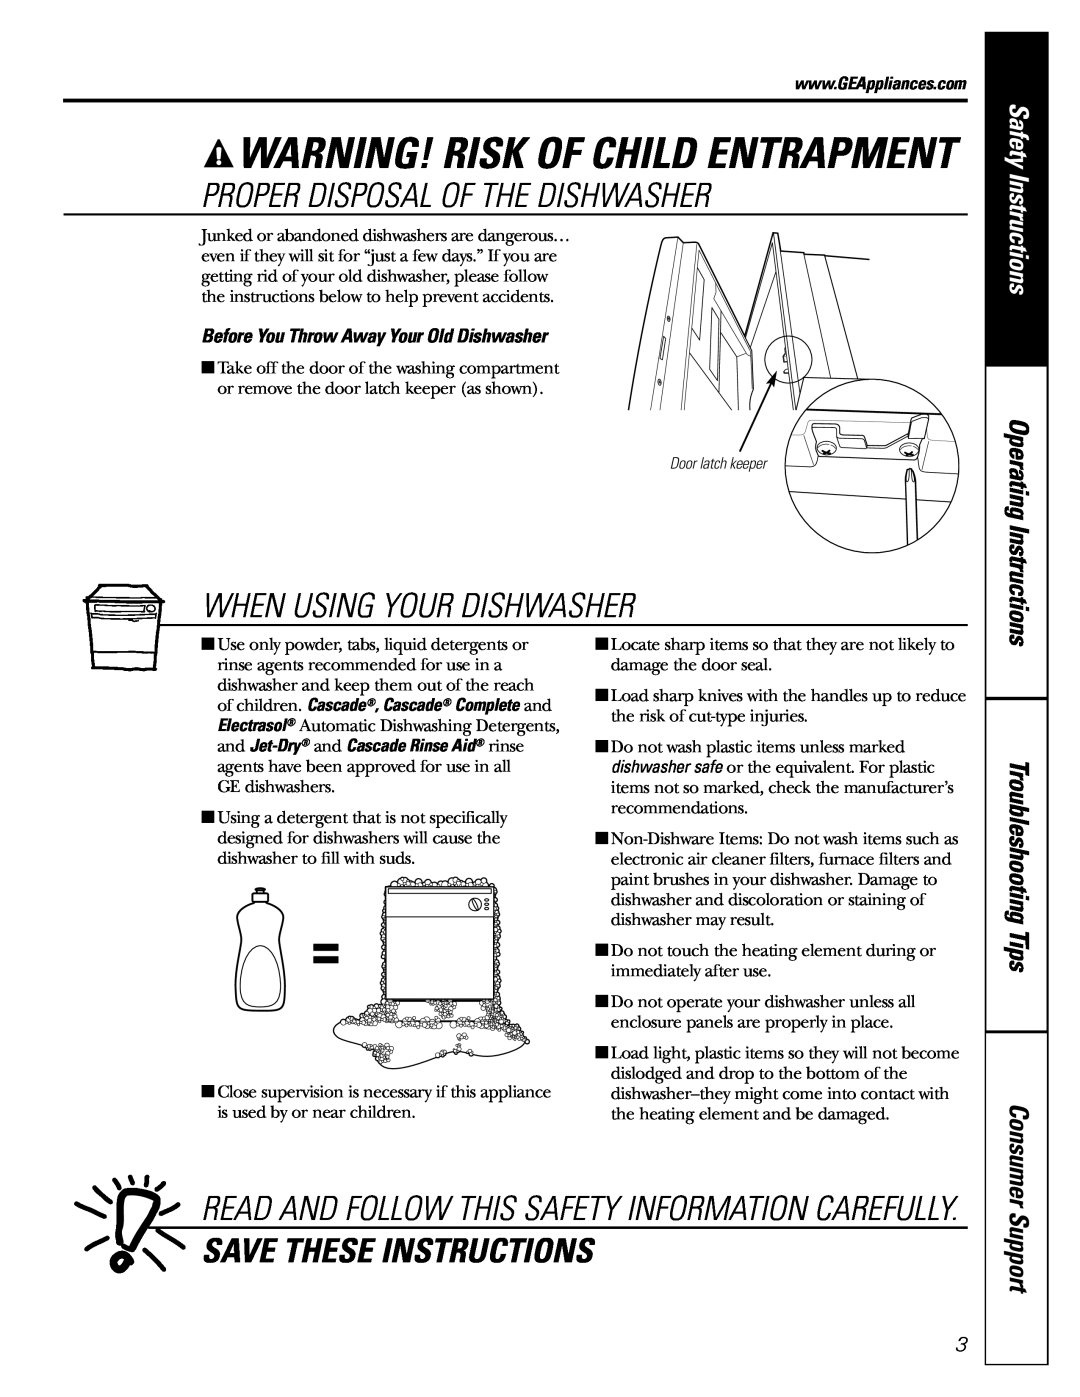 GE GSD1100G Proper Disposal Of The Dishwasher, When Using Your Dishwasher, Save These Instructions, Support, Consumer 